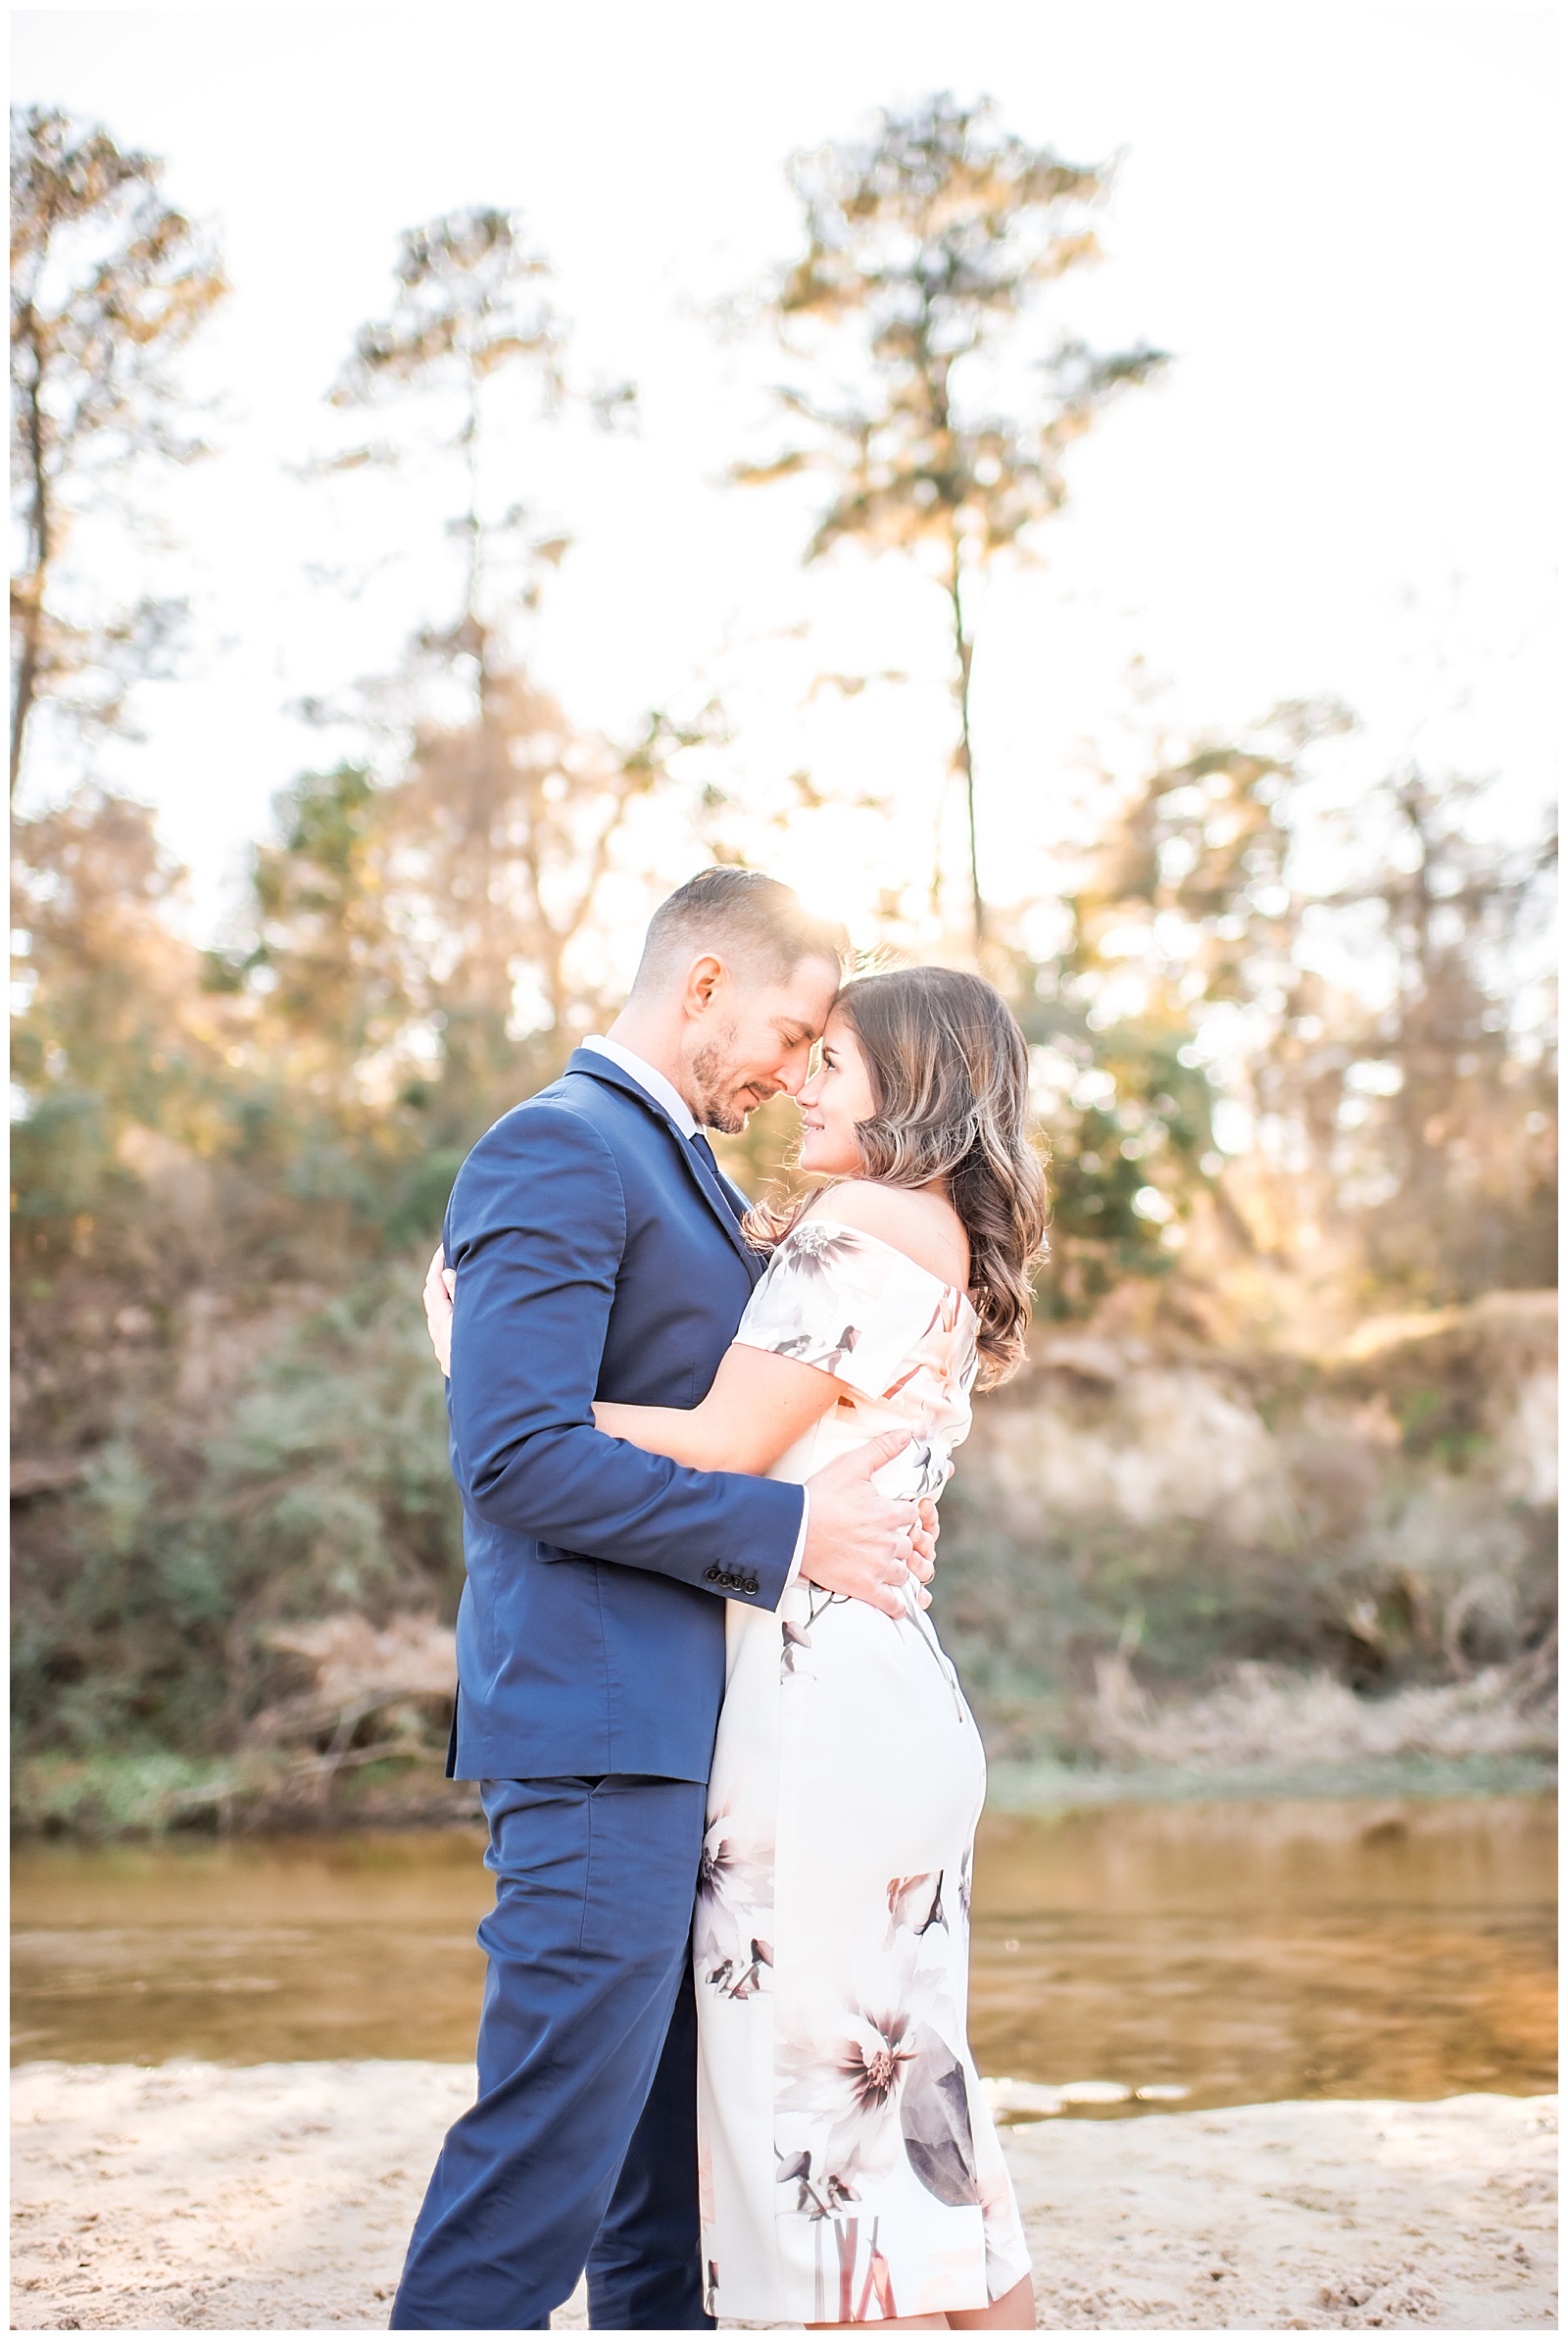 Engagement Photography in The Woodlands, Texas